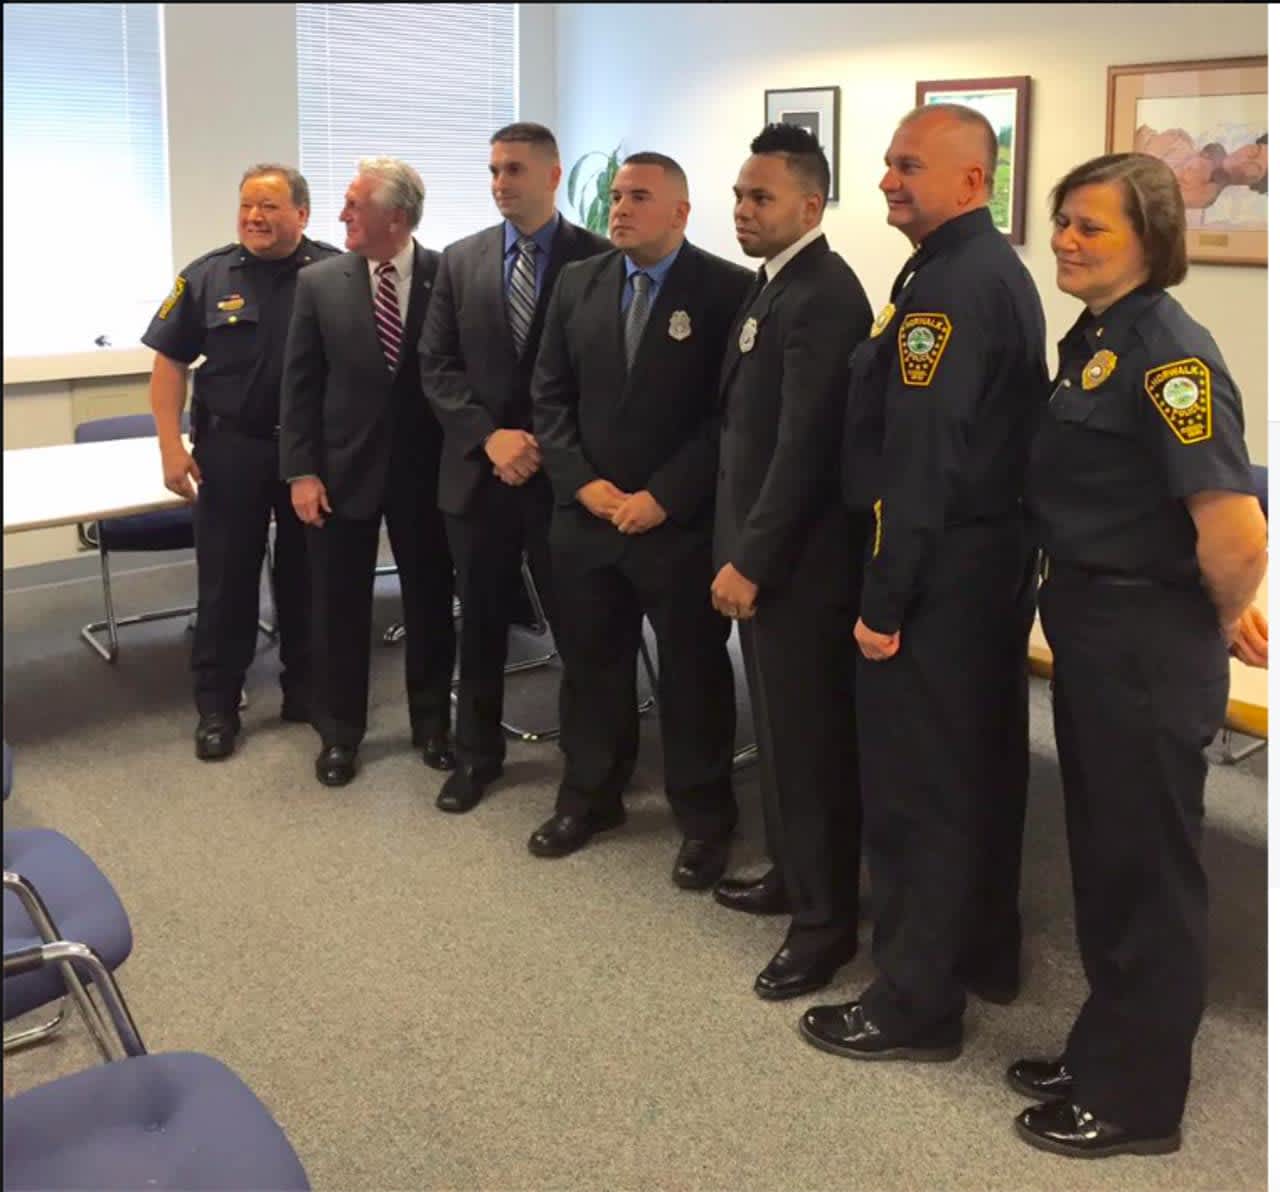 From left, DC Gonzalez, Norwalk Mayor Harry Rilling, Officer Brian Hamm, Officer Jaime Acosta, Officer Ariel Martinez, Chief Kulhawik and DC Zecca at the swearing-in ceremony.